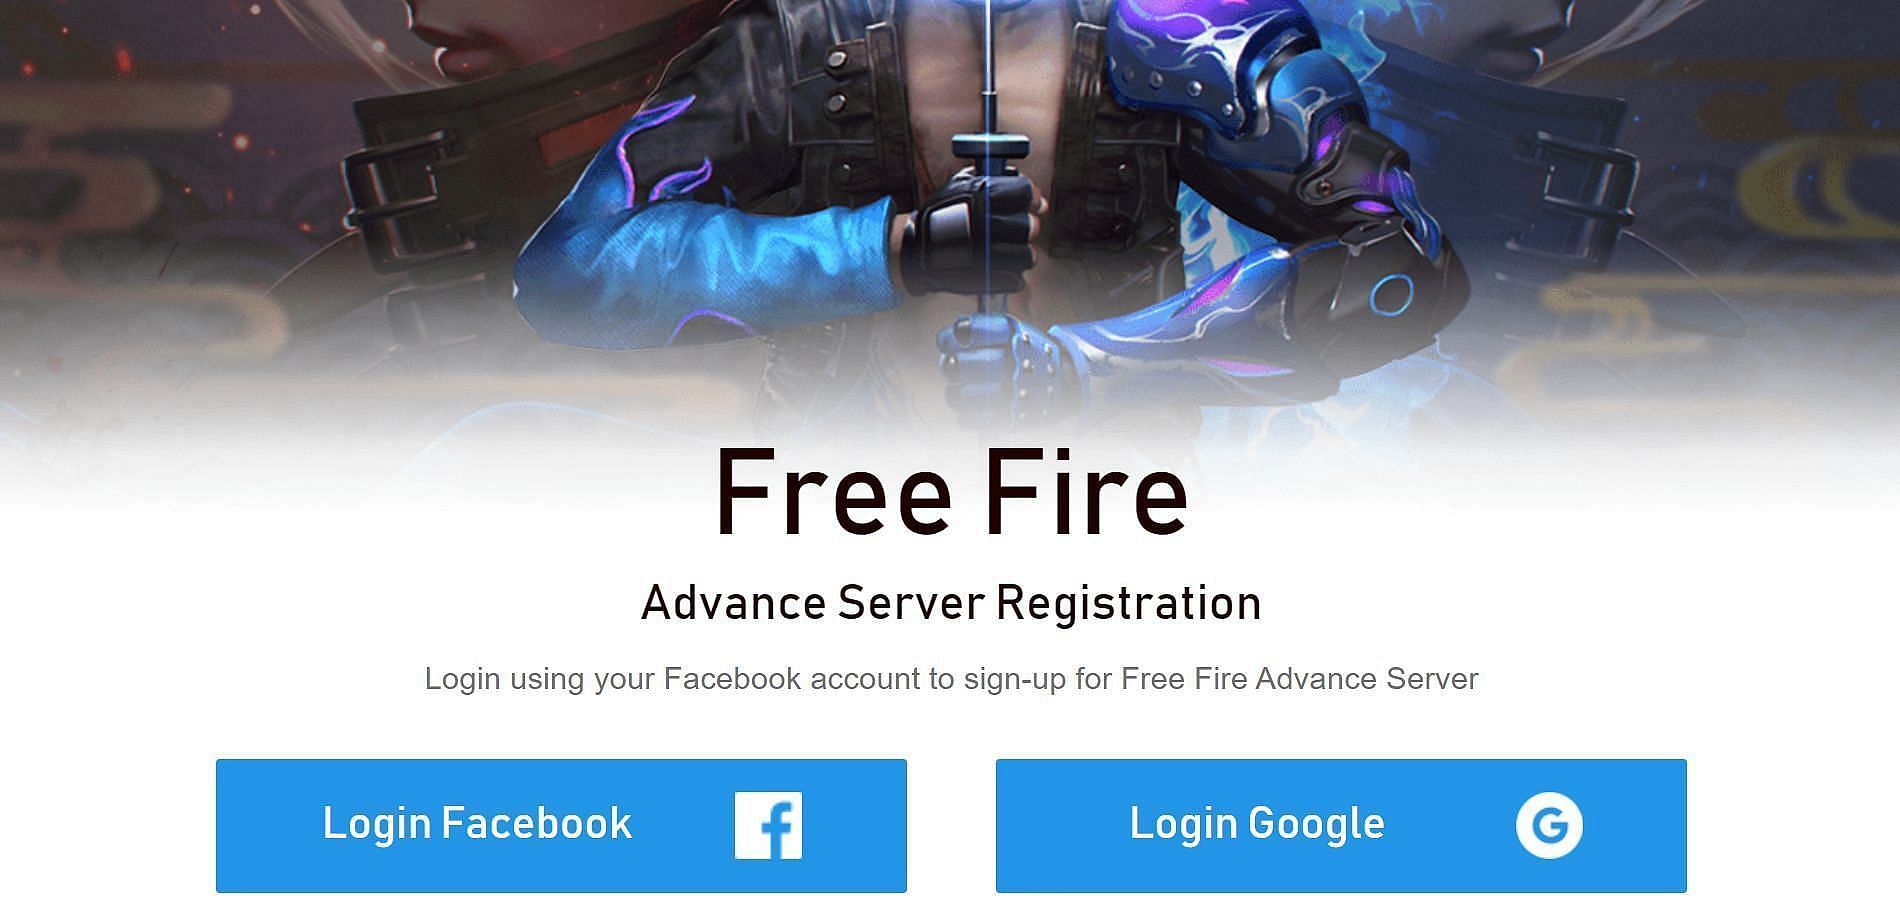 Registration process is must to access the Advance server (Image via Garena)